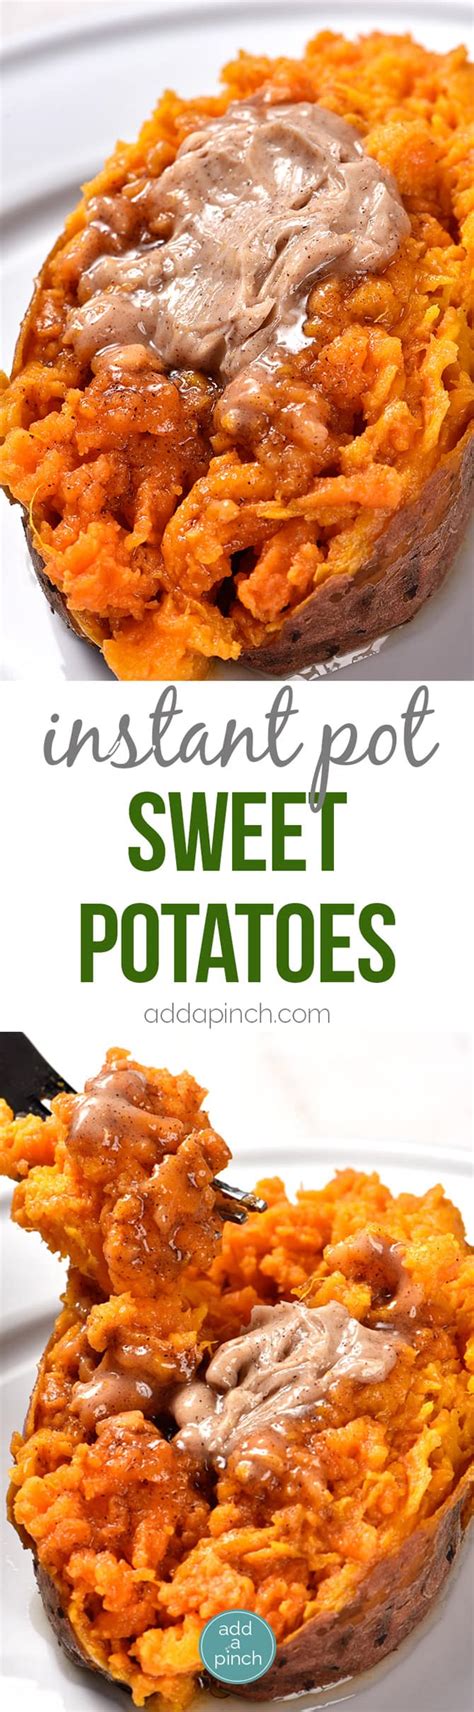 No need to poke holes in them. Instant Pot Sweet Potatoes Recipe - Add a Pinch